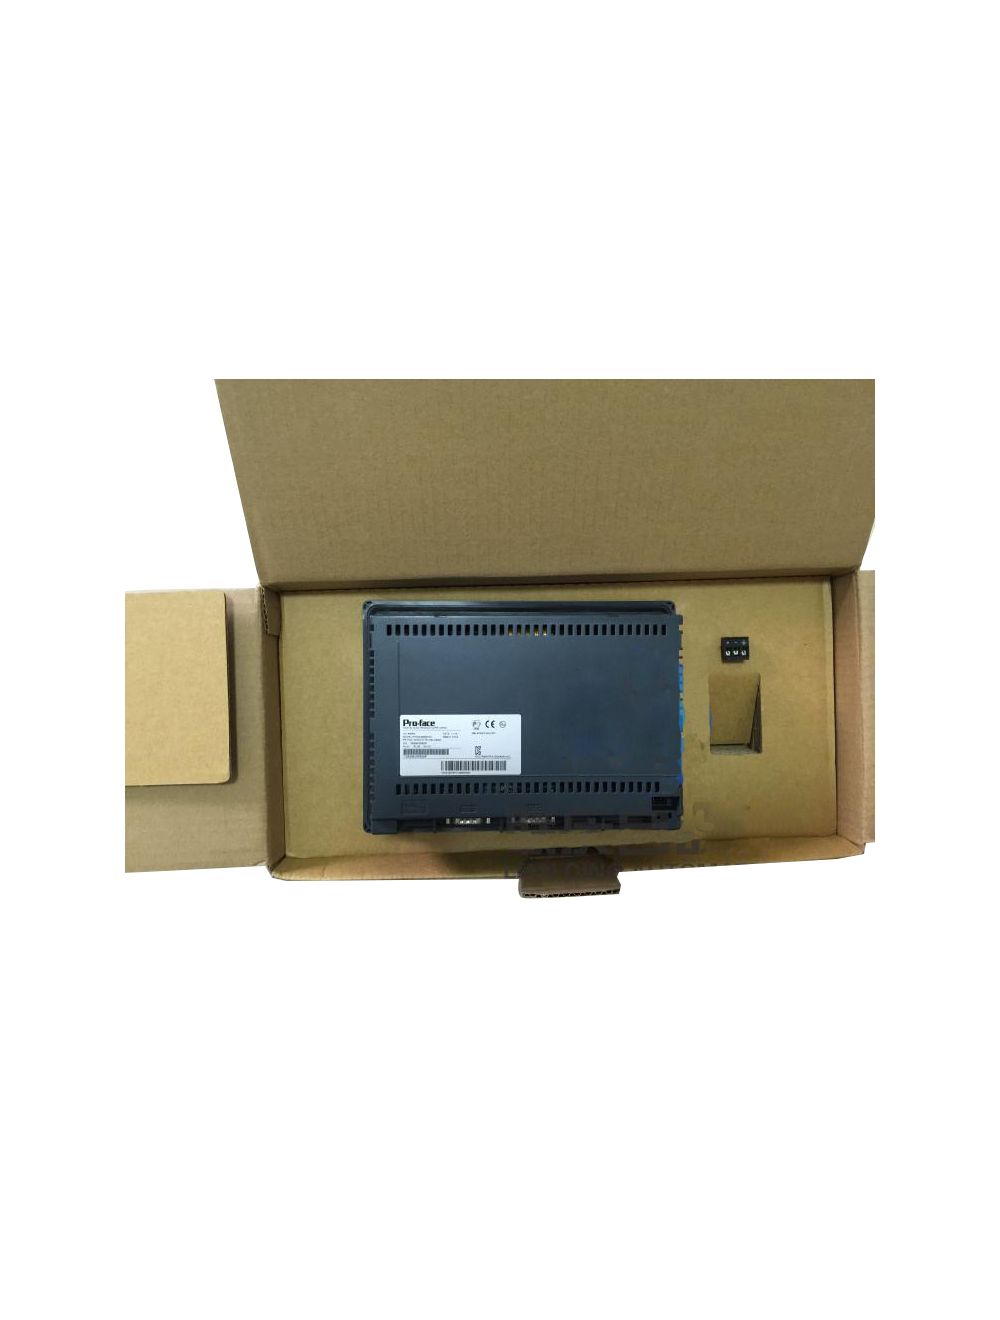 New In stock for sale, Pro-face HMI PFXGE4402WAD